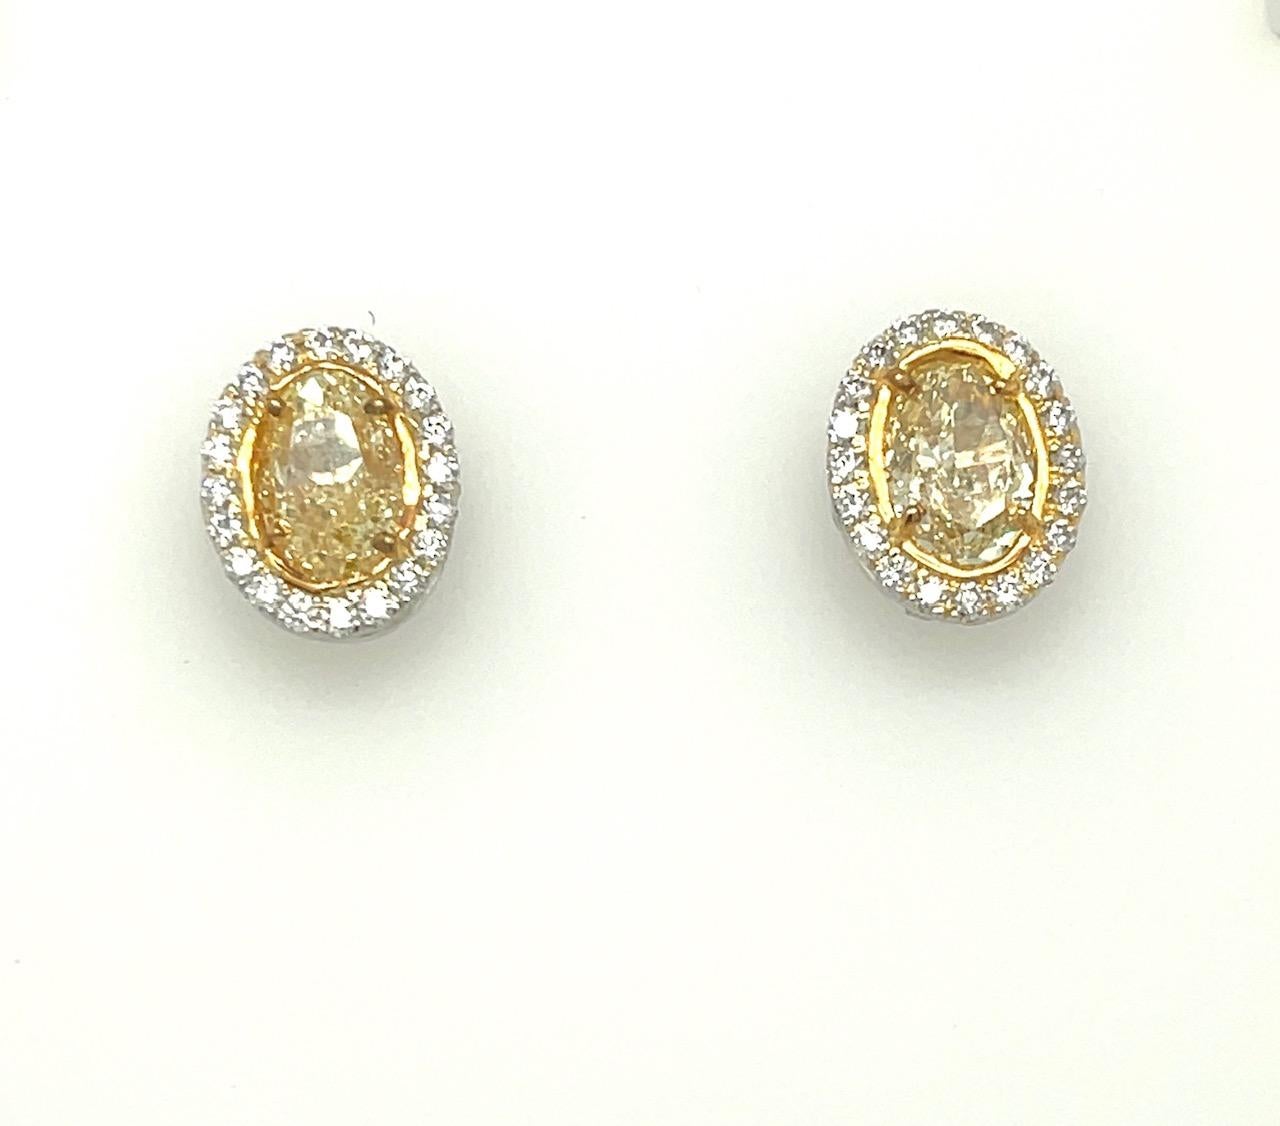 Oval Yellow Diamond Stud Earrings 3.13 carats GIA Cerified

Oval Yellow Diamond weighs 1.62 carats

Y-Z Color SI1 Clarity

With GIA Certificate # 2225254200

Oval Yellow Diamond weighs 1.51 carats

Y-Z Color I1 Clarity

With GIA Certificate #